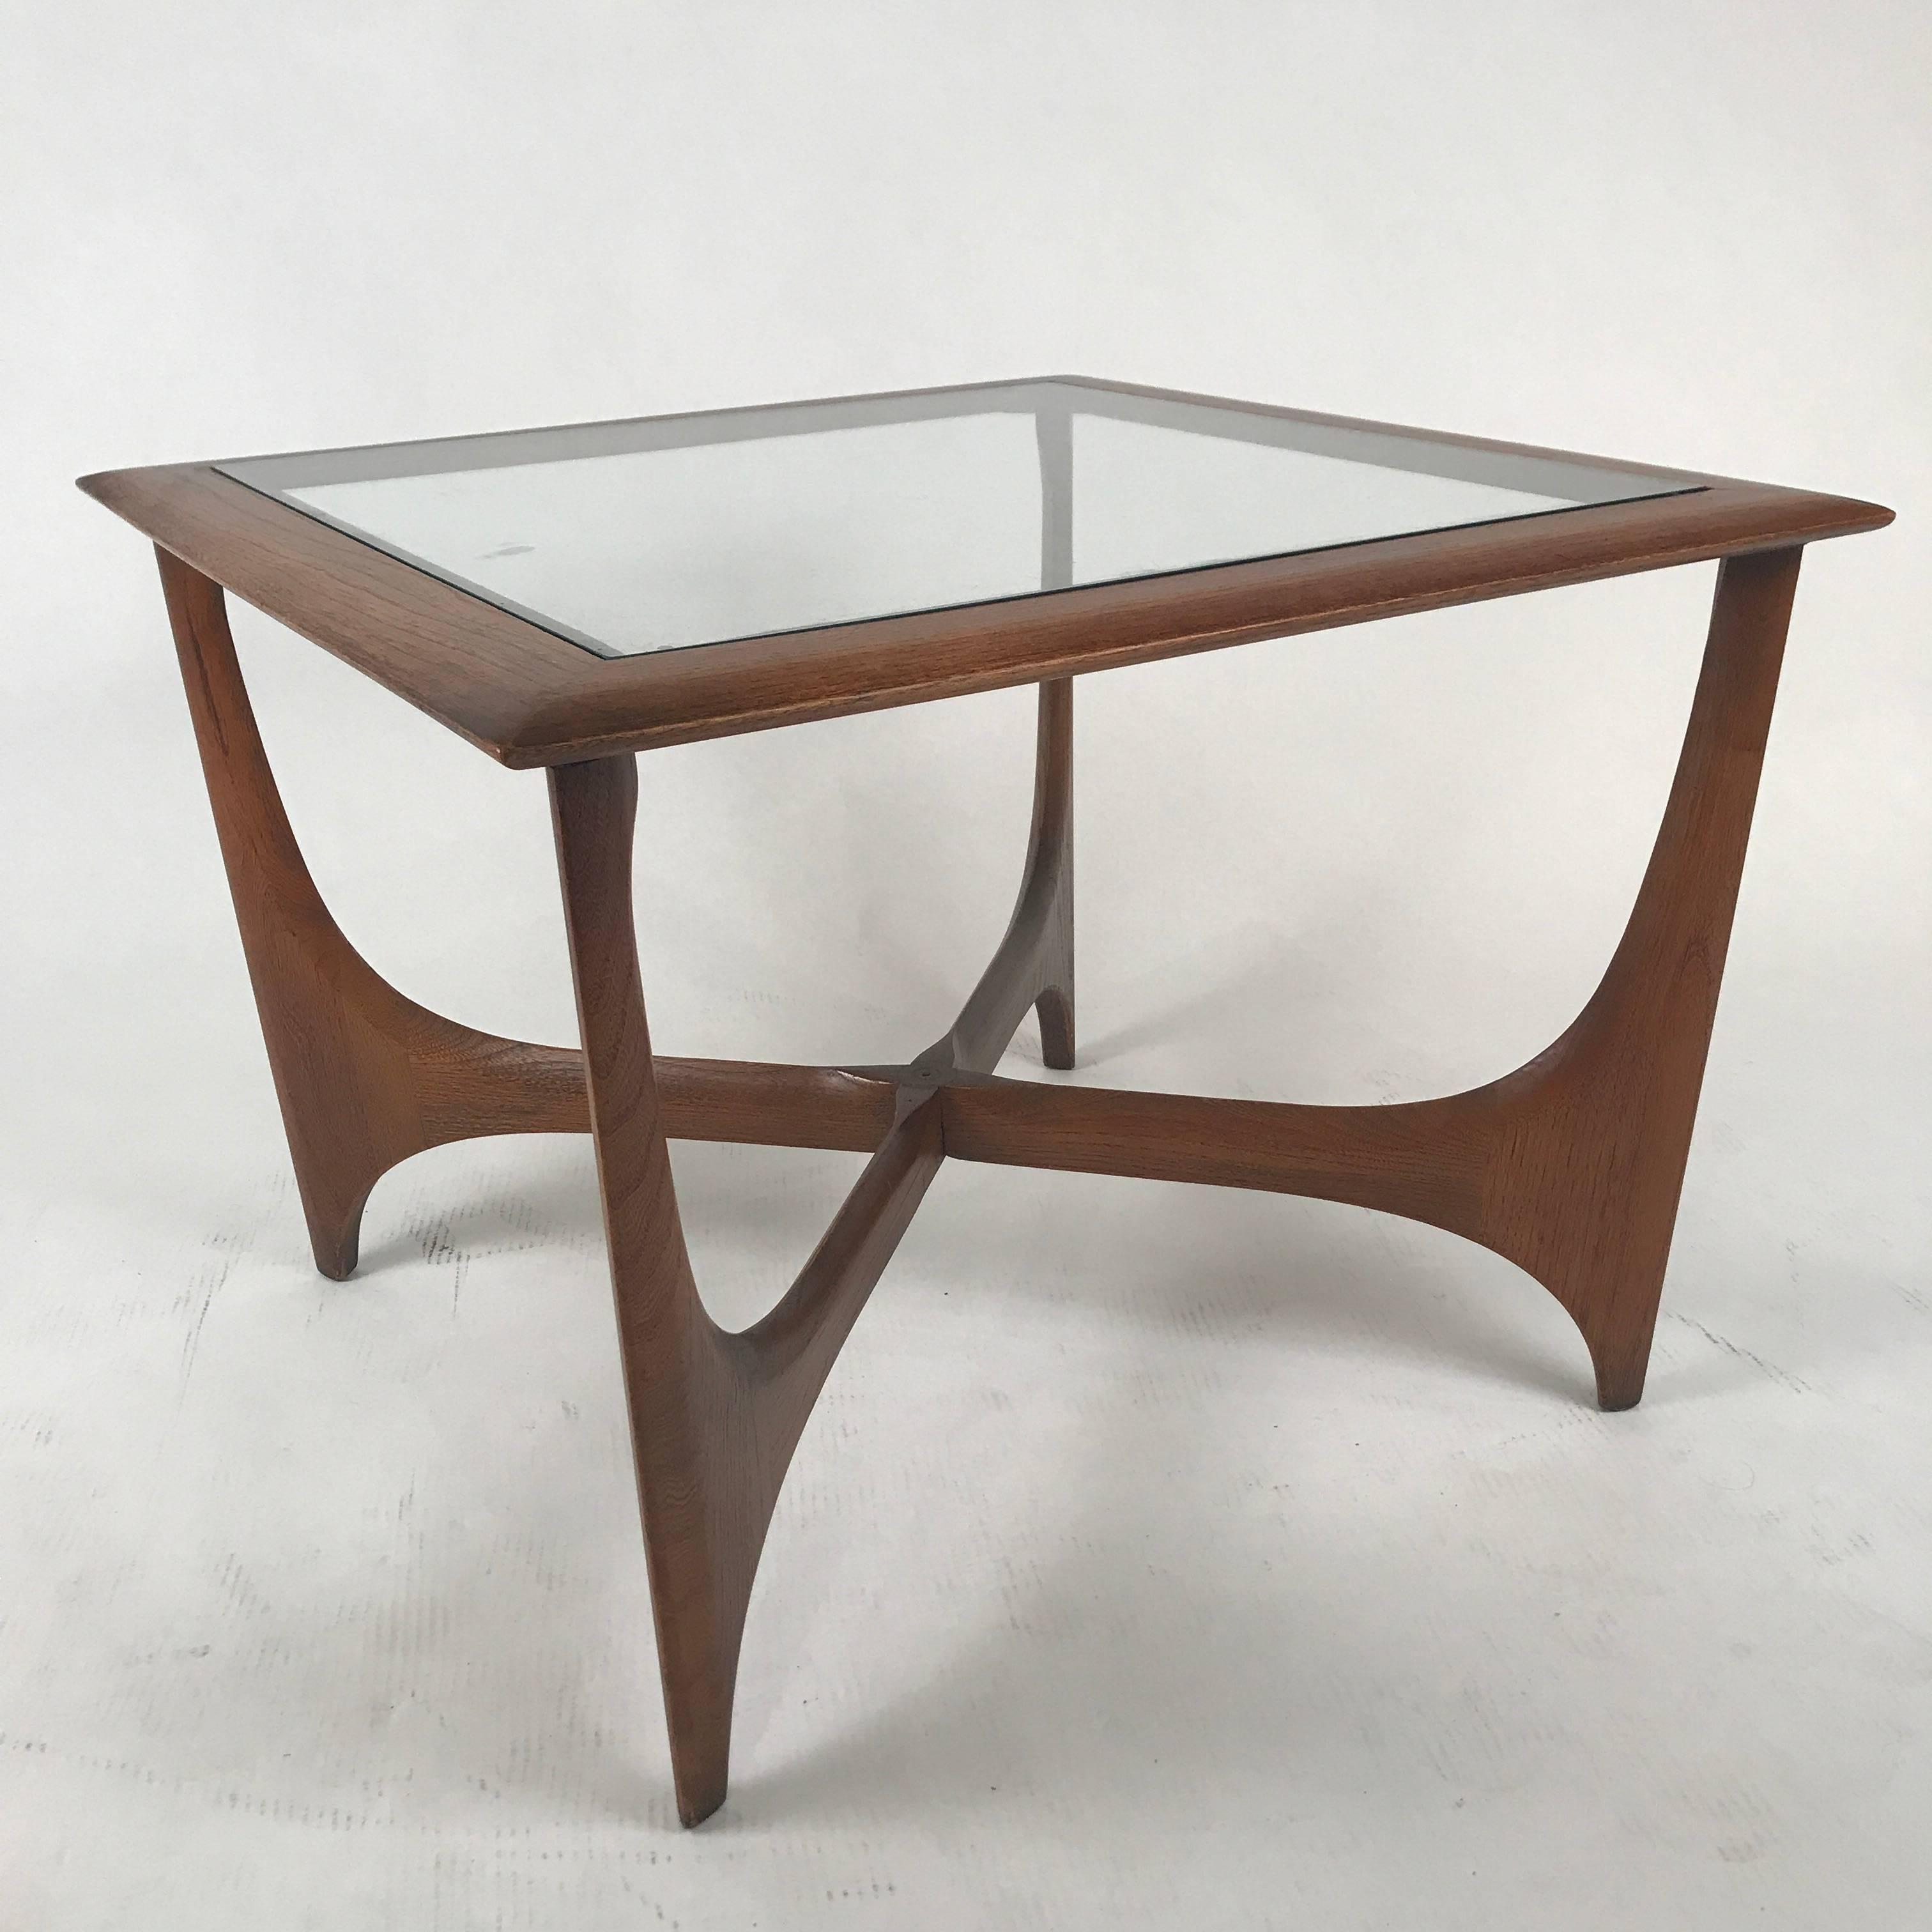 Sculptural end table from 1967 constructed of walnut and glass. Gorgeous classic midcentury design.